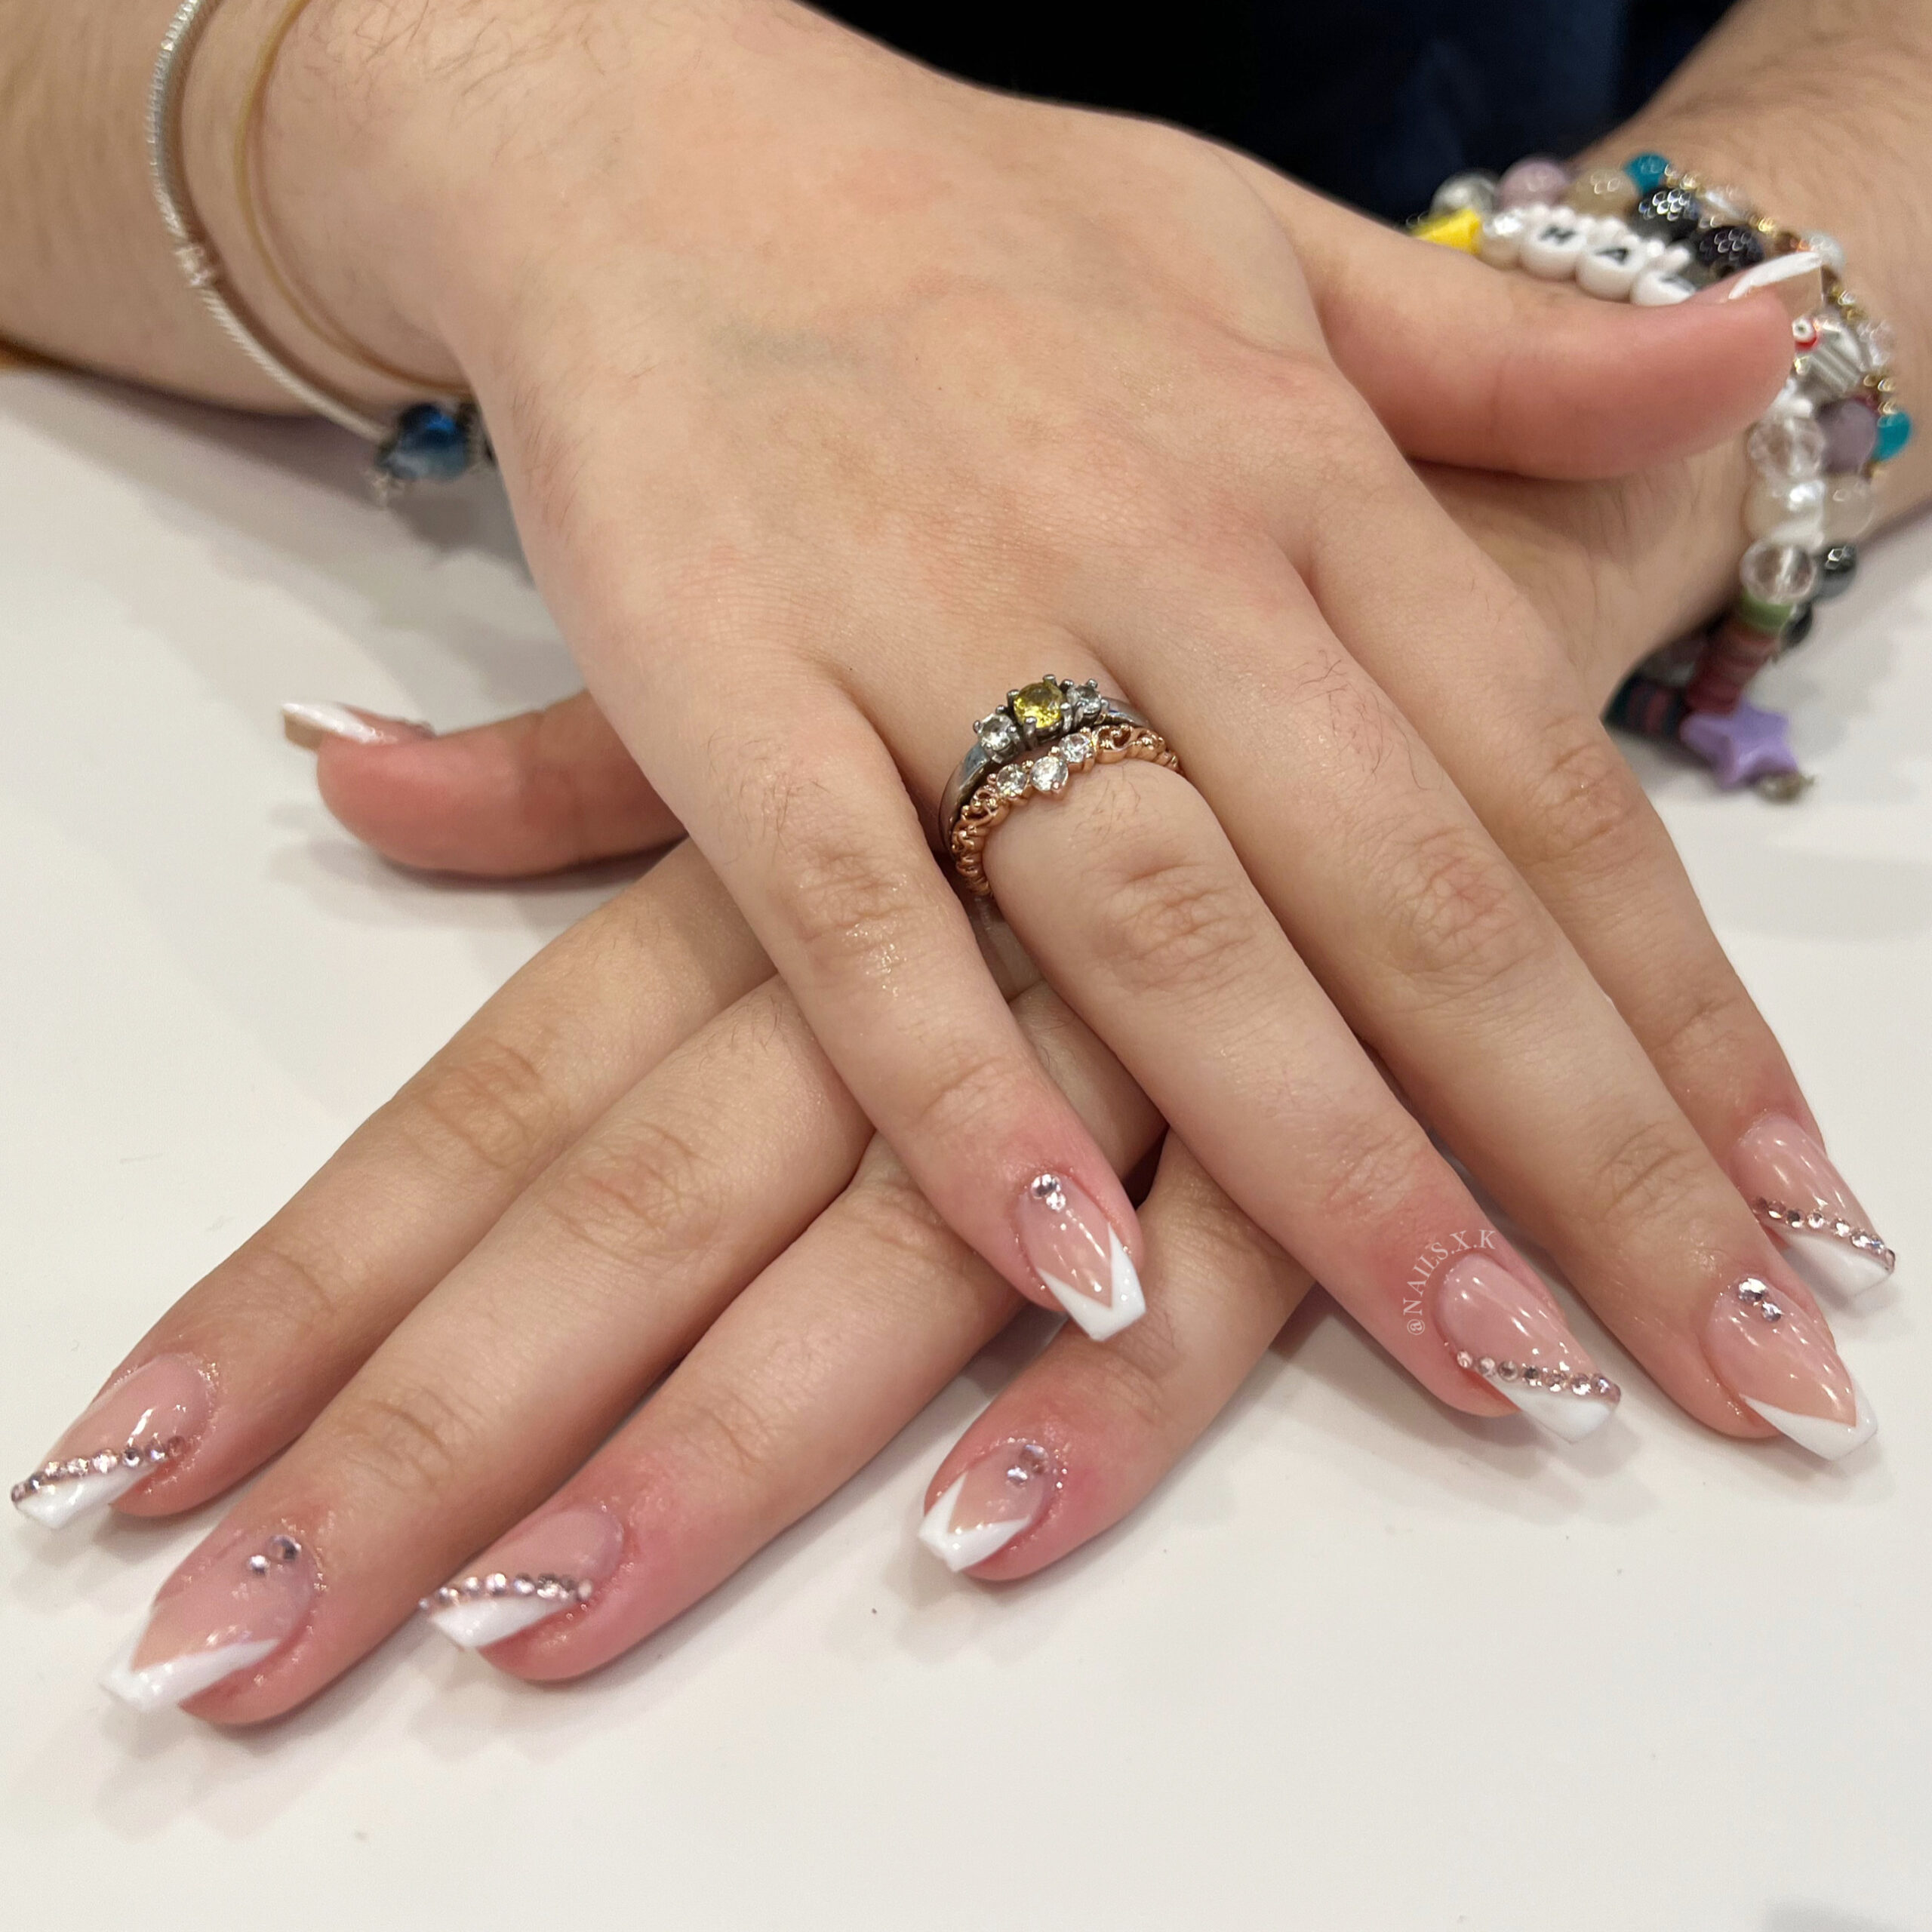 Hard Gel with V-french tips and rhinestone accents. Nails by K